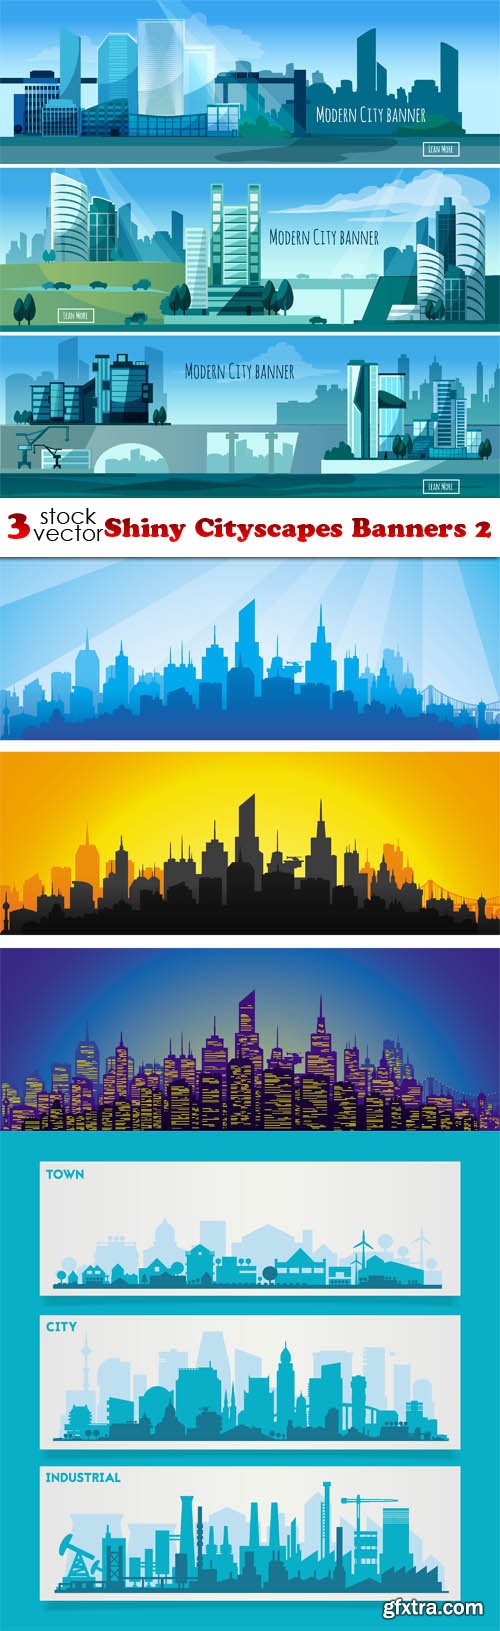 Vectors - Shiny Cityscapes Banners 2